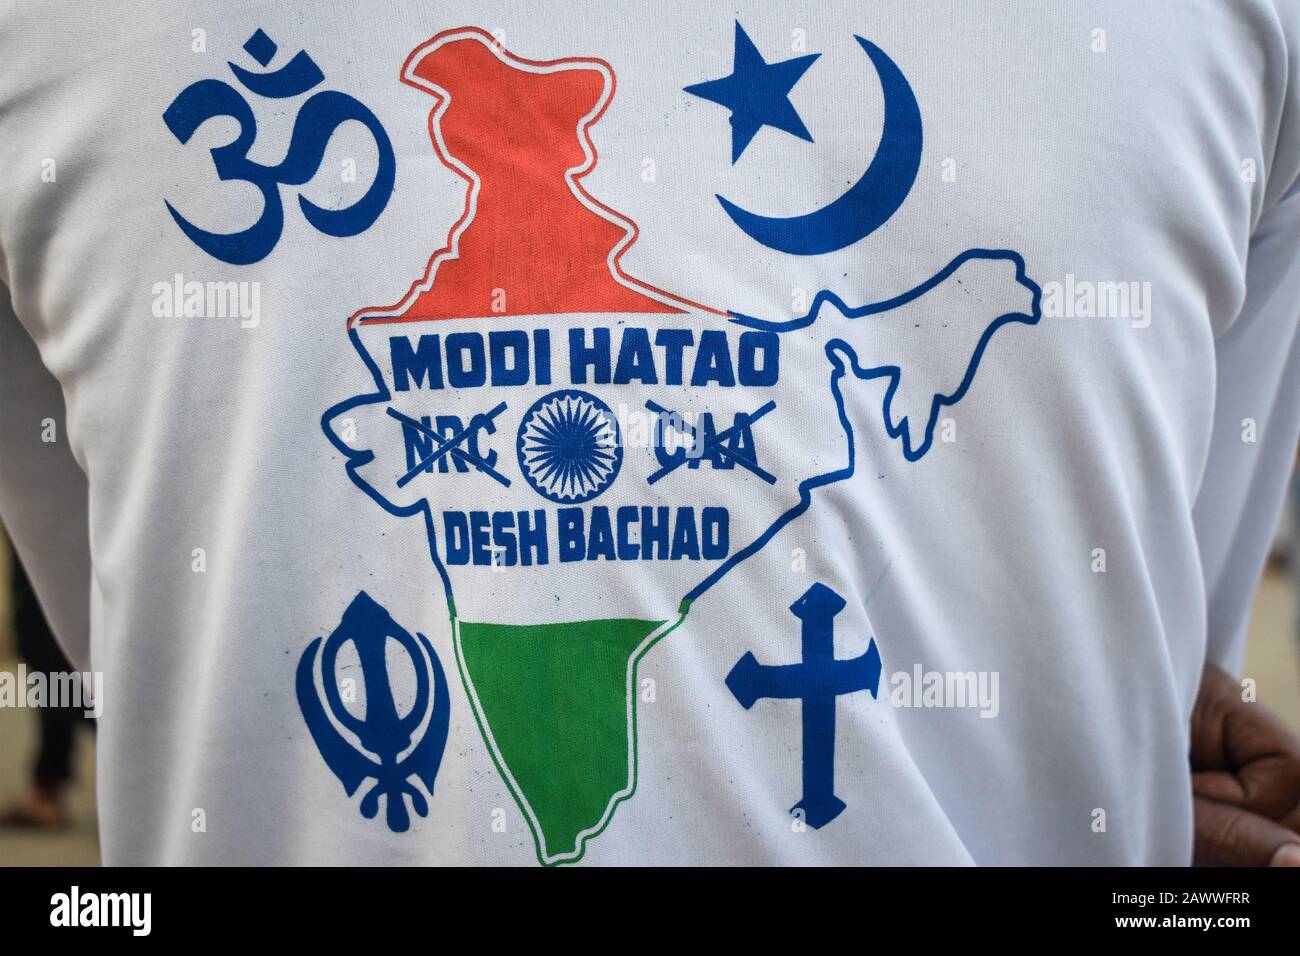 A man is wearing an NRC protest thirst on an NRC and CAA protest rally in Kolkata, India. Stock Photo